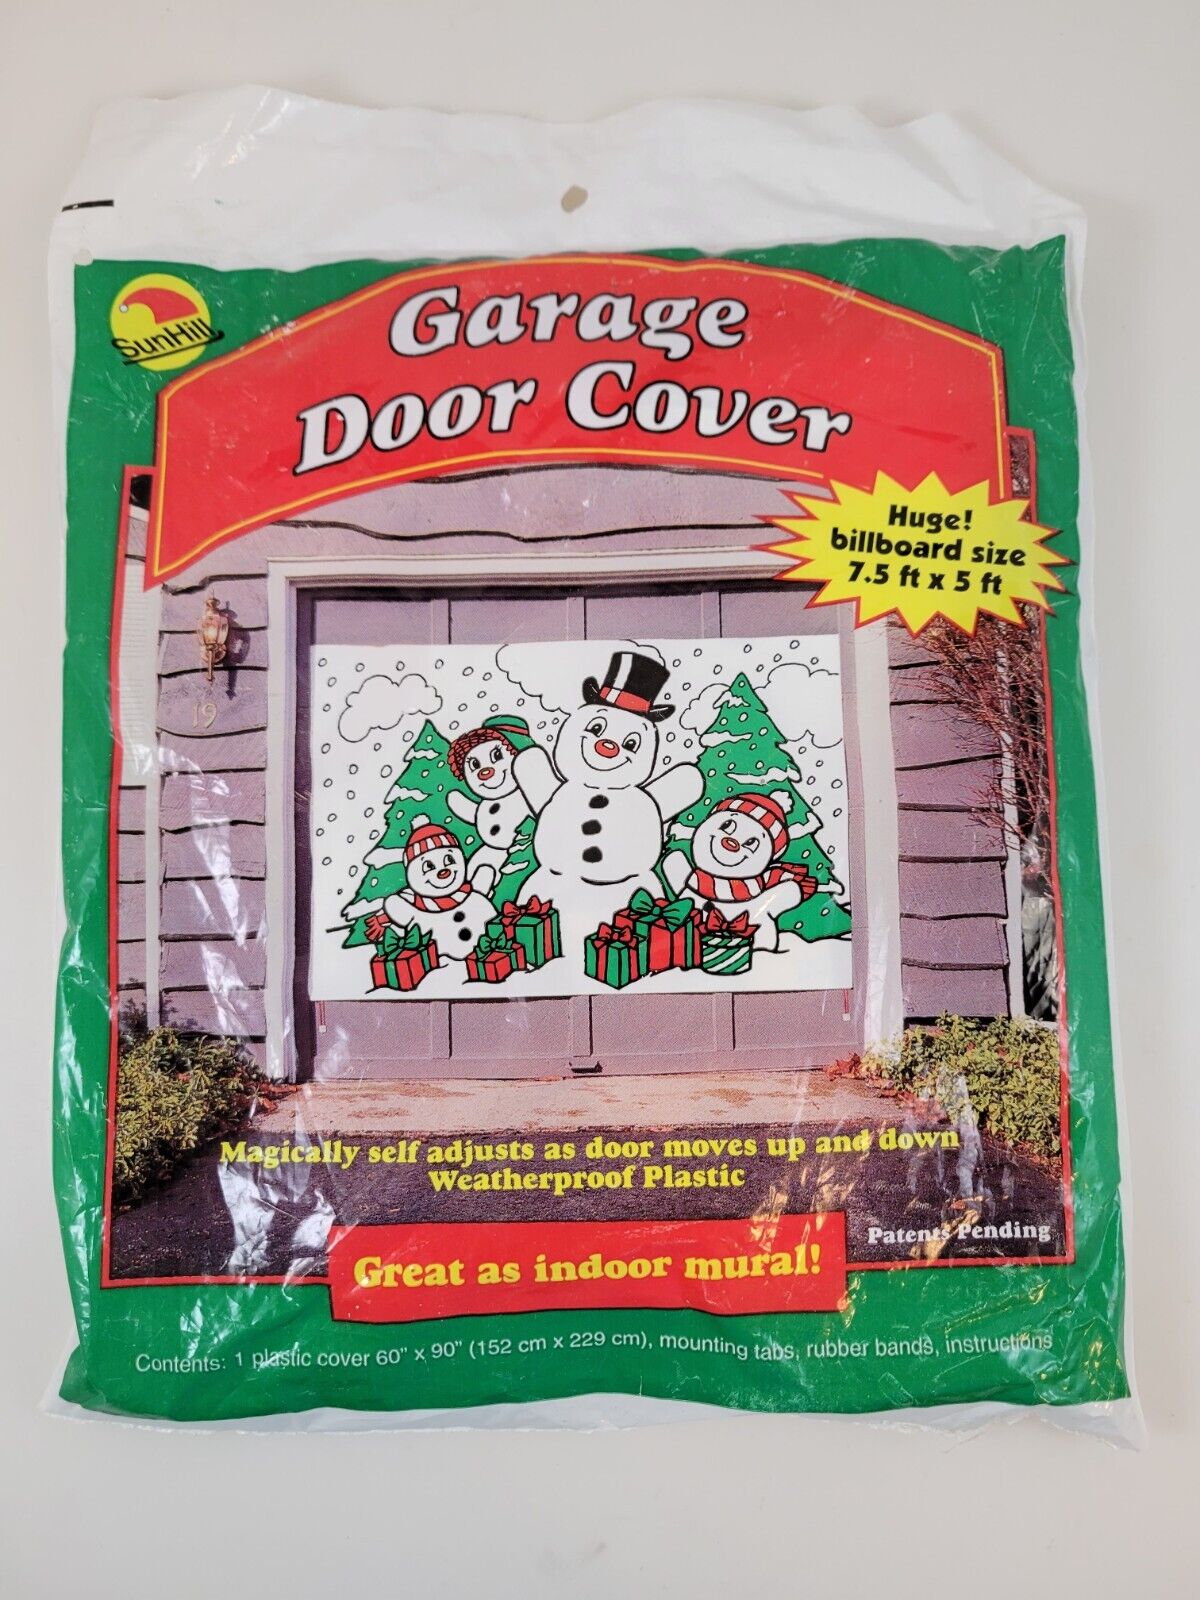 VTG Sun Hill SNOW MAN W/ FAMILY Garage Door Cover Christmas 7.5 ft. by 5 ft.USA